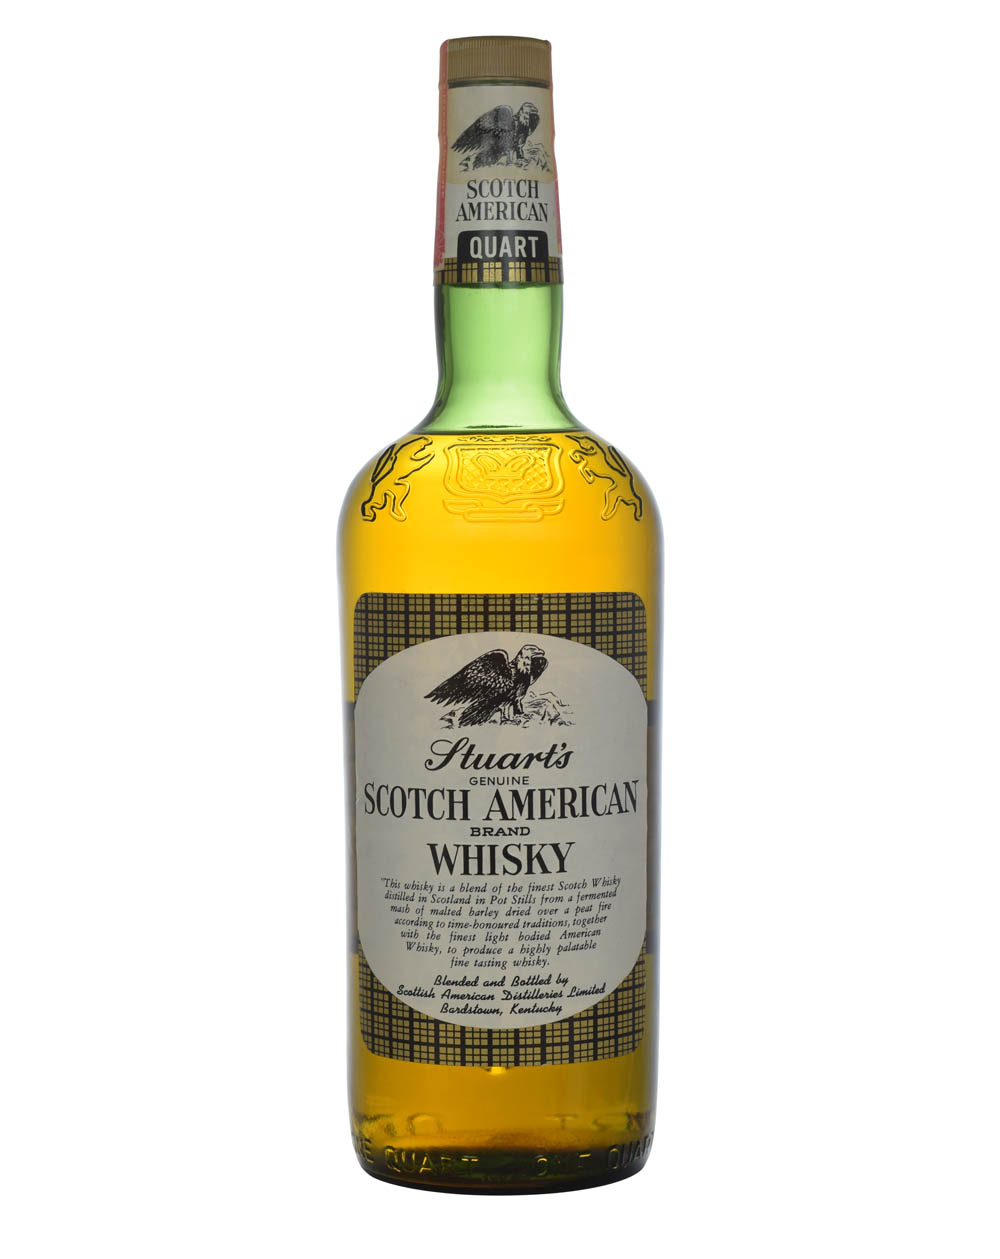 Stuart's Scotch American Brand Whisky Musthave Malts MHM